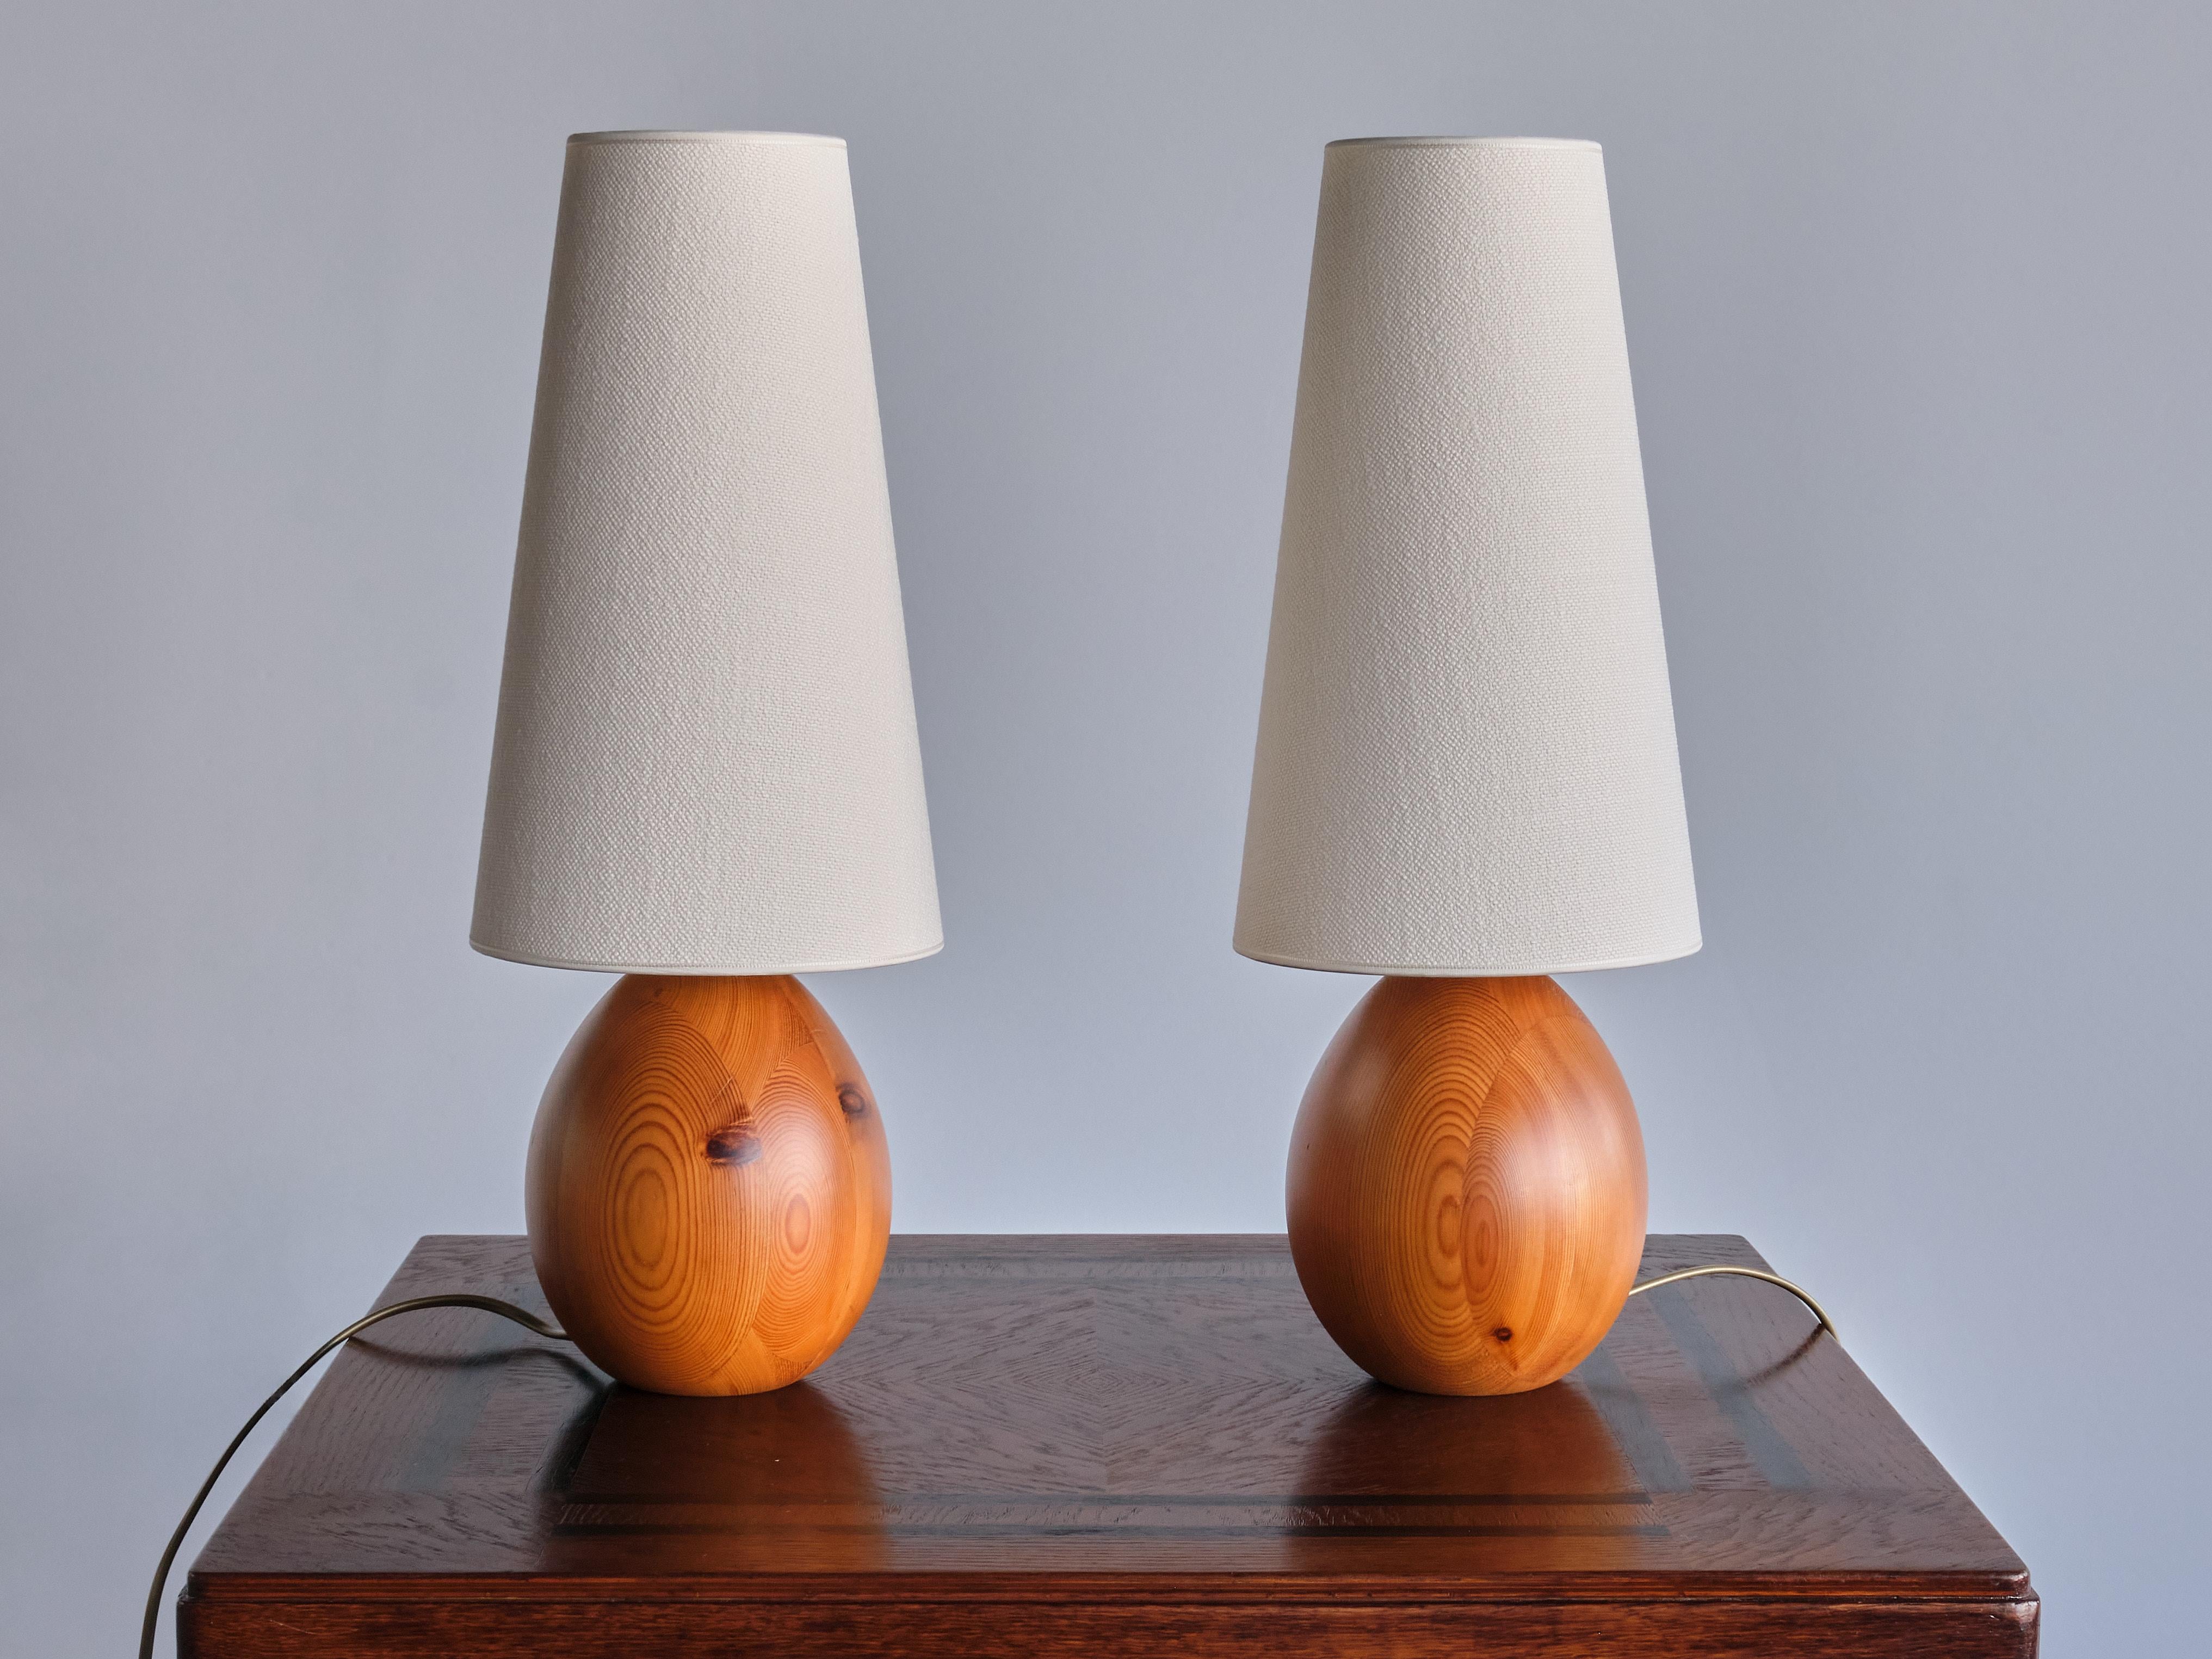 This striking pair of table lamps was produced by the manufacturer Markslöjd in Sweden in the 1960s.
The organic, oval shaped bases are made of solid pine wood with a beautiful wood grain. The tall, cone shaped shade gives the design a striking